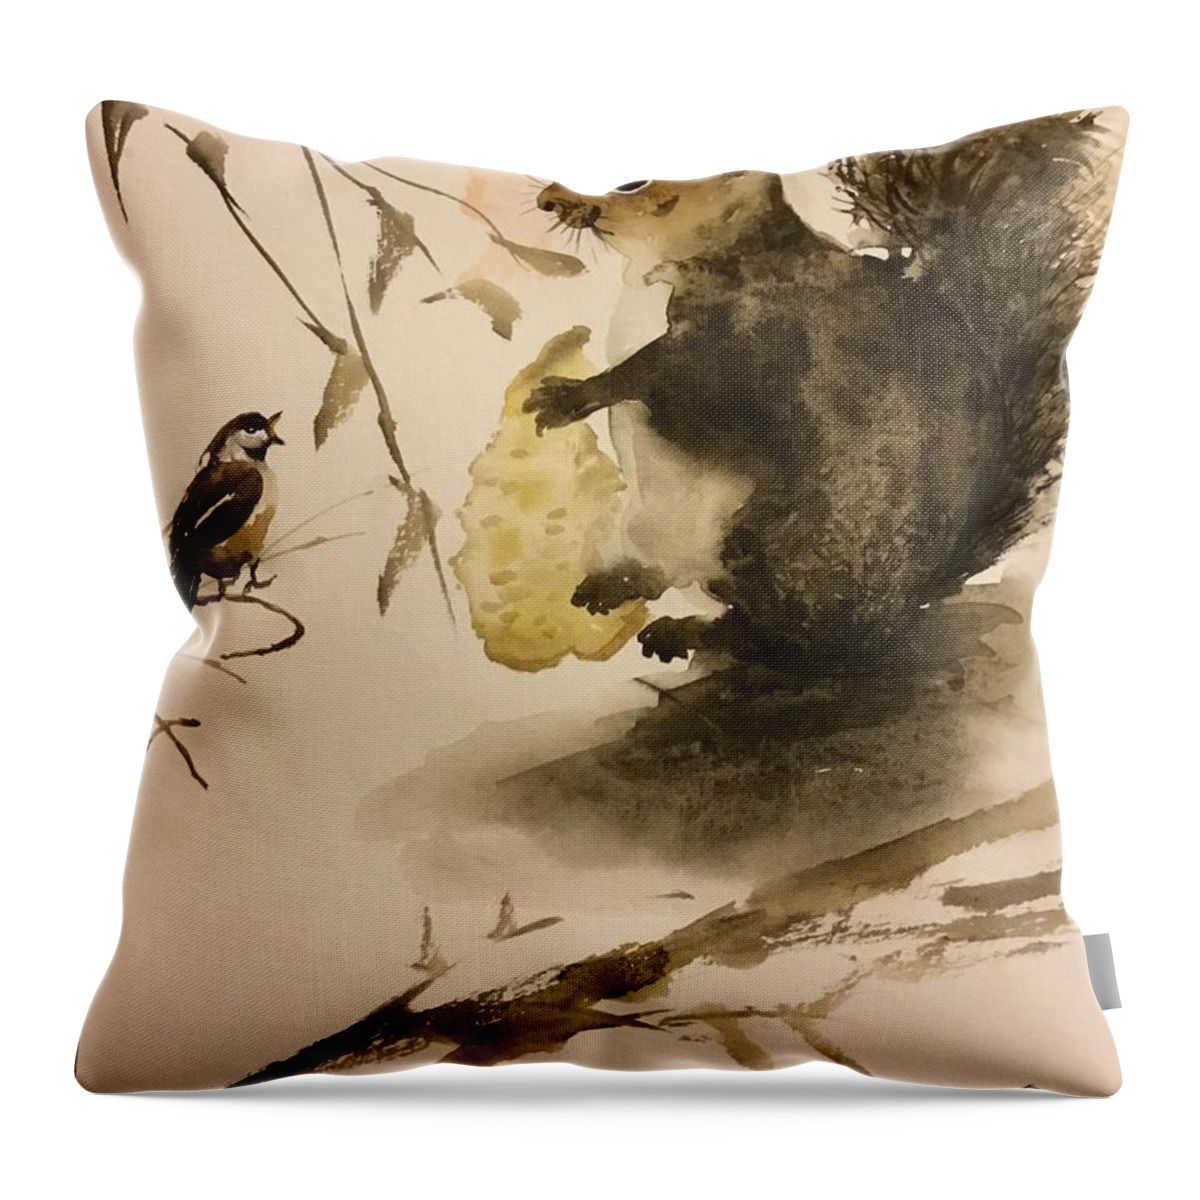 1072019 Throw Pillow featuring the painting 1072019 by Han in Huang wong